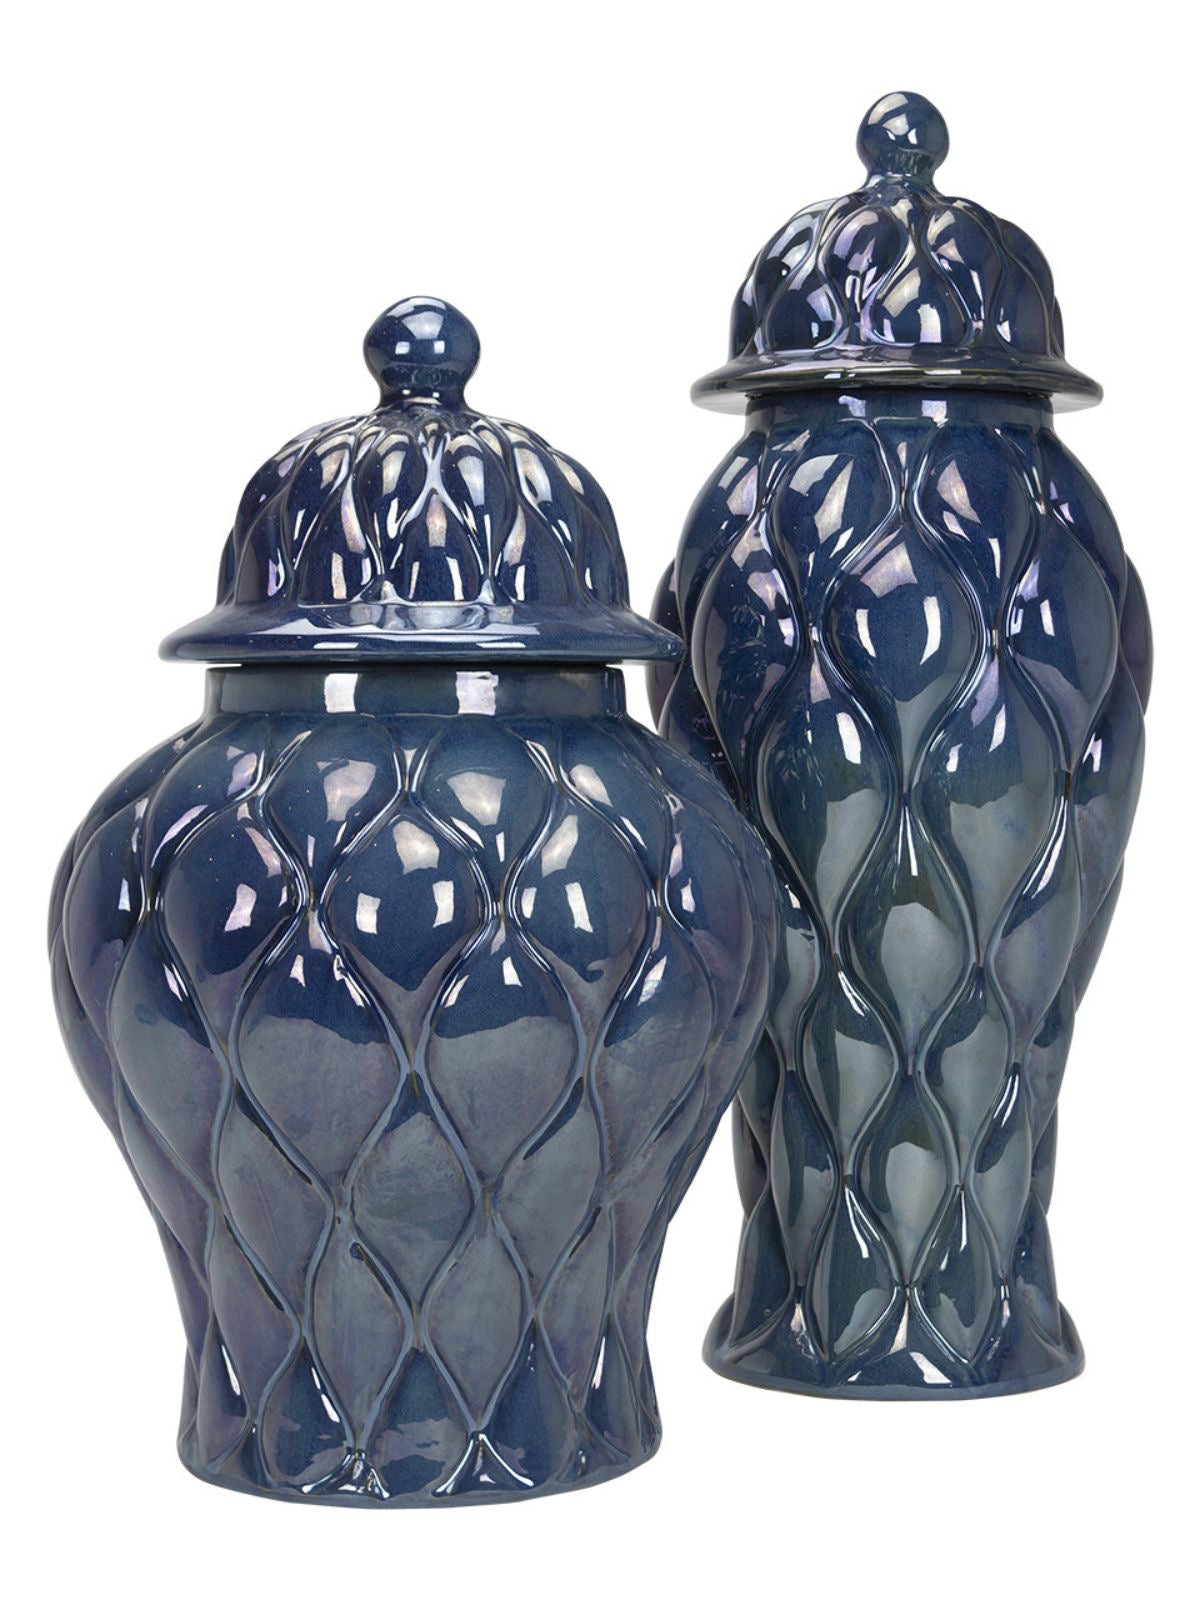 Sapphire Blue Ceramic Ginger Jar with Quilt Pattern and Lids available in 2 sizes | KYA Home Decor